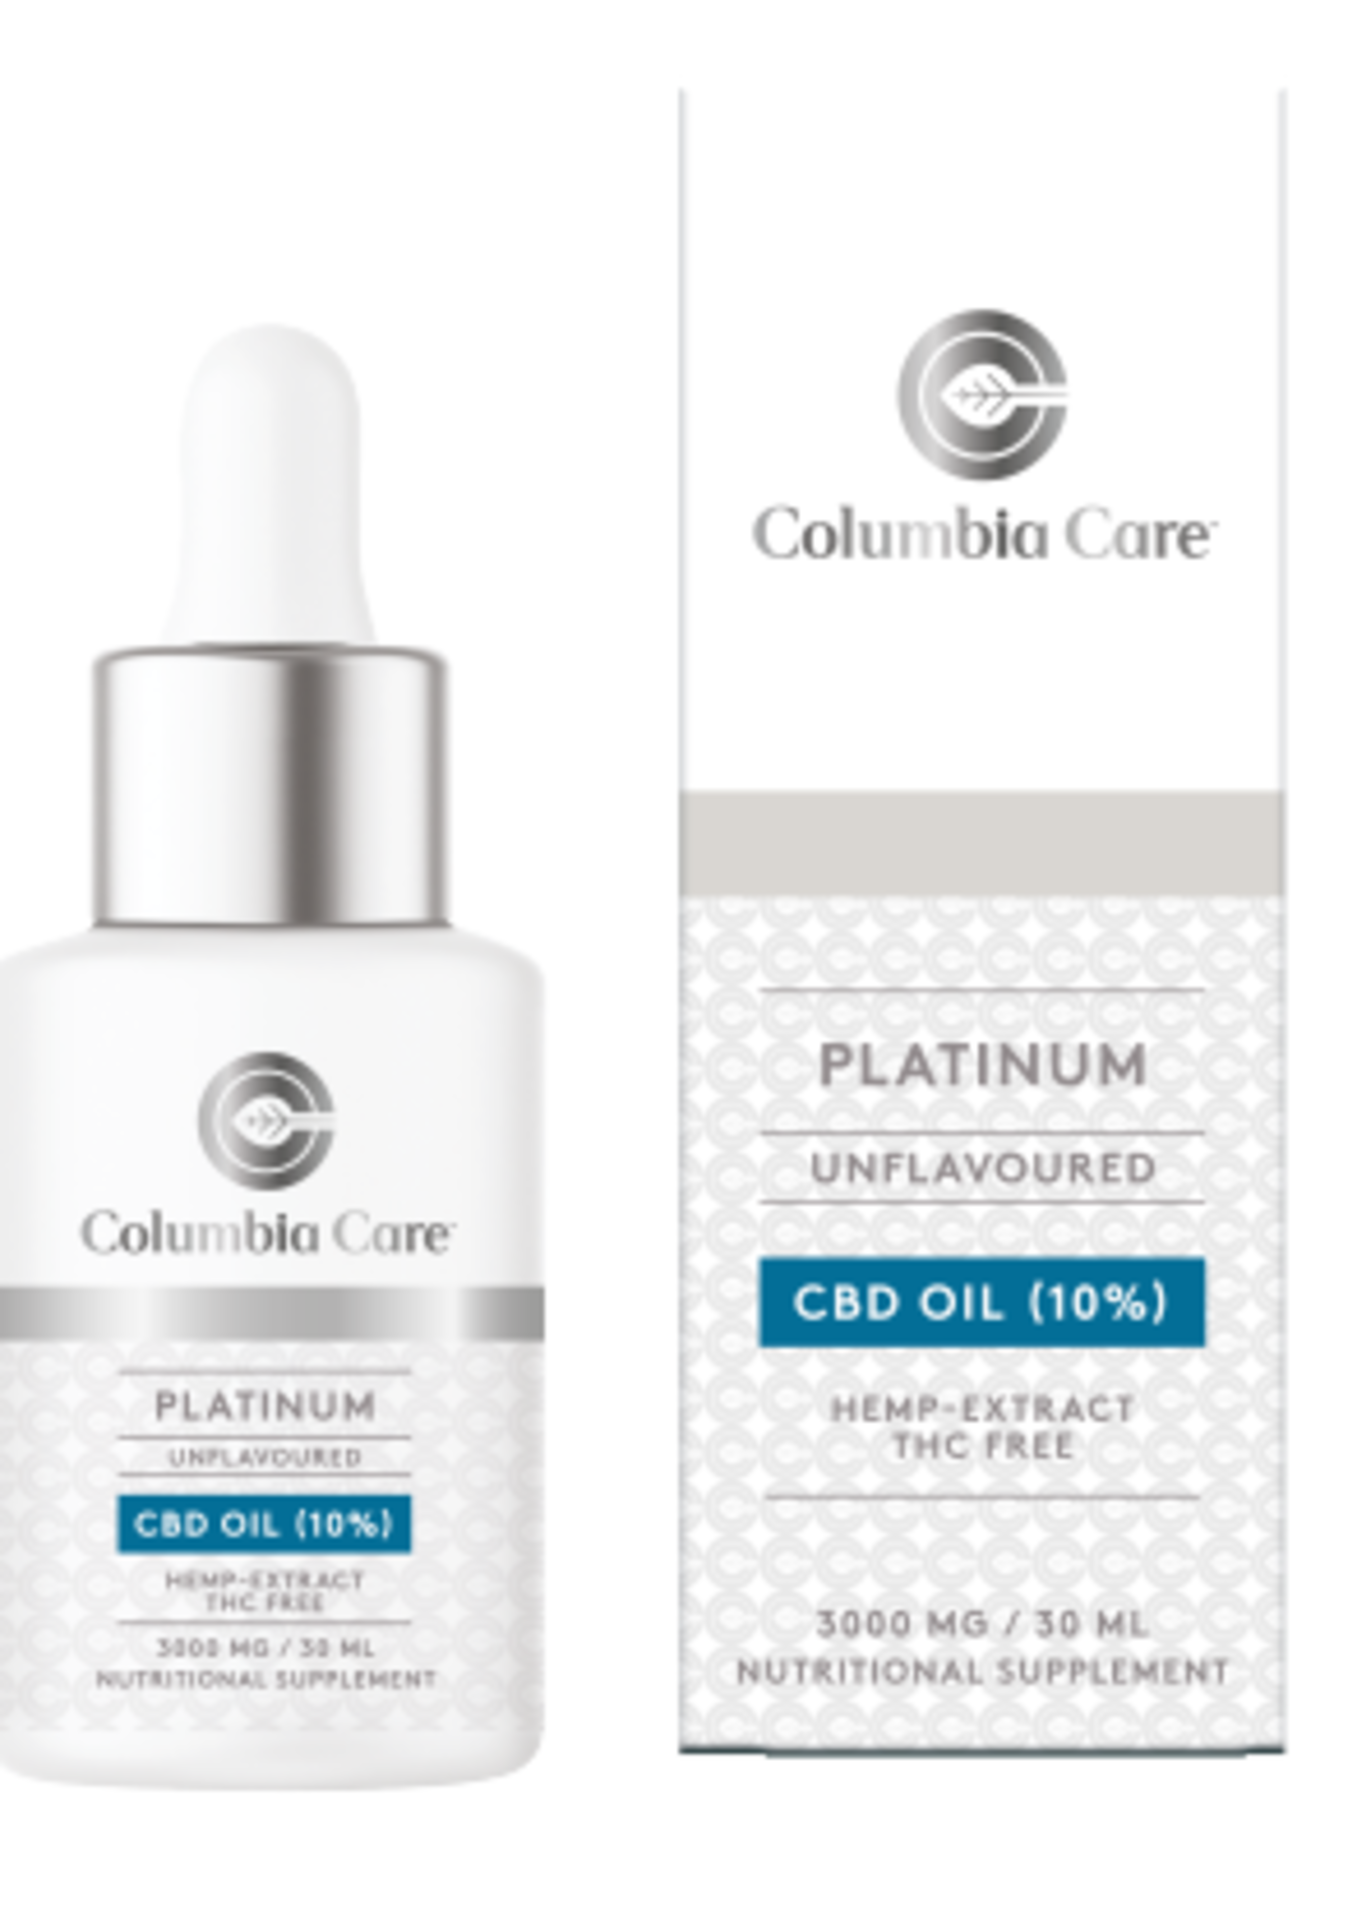 50 x Brand New Columbia Care Platinum oils in various flavours and mg 30ml. Columbia Care, a leading - Image 2 of 2